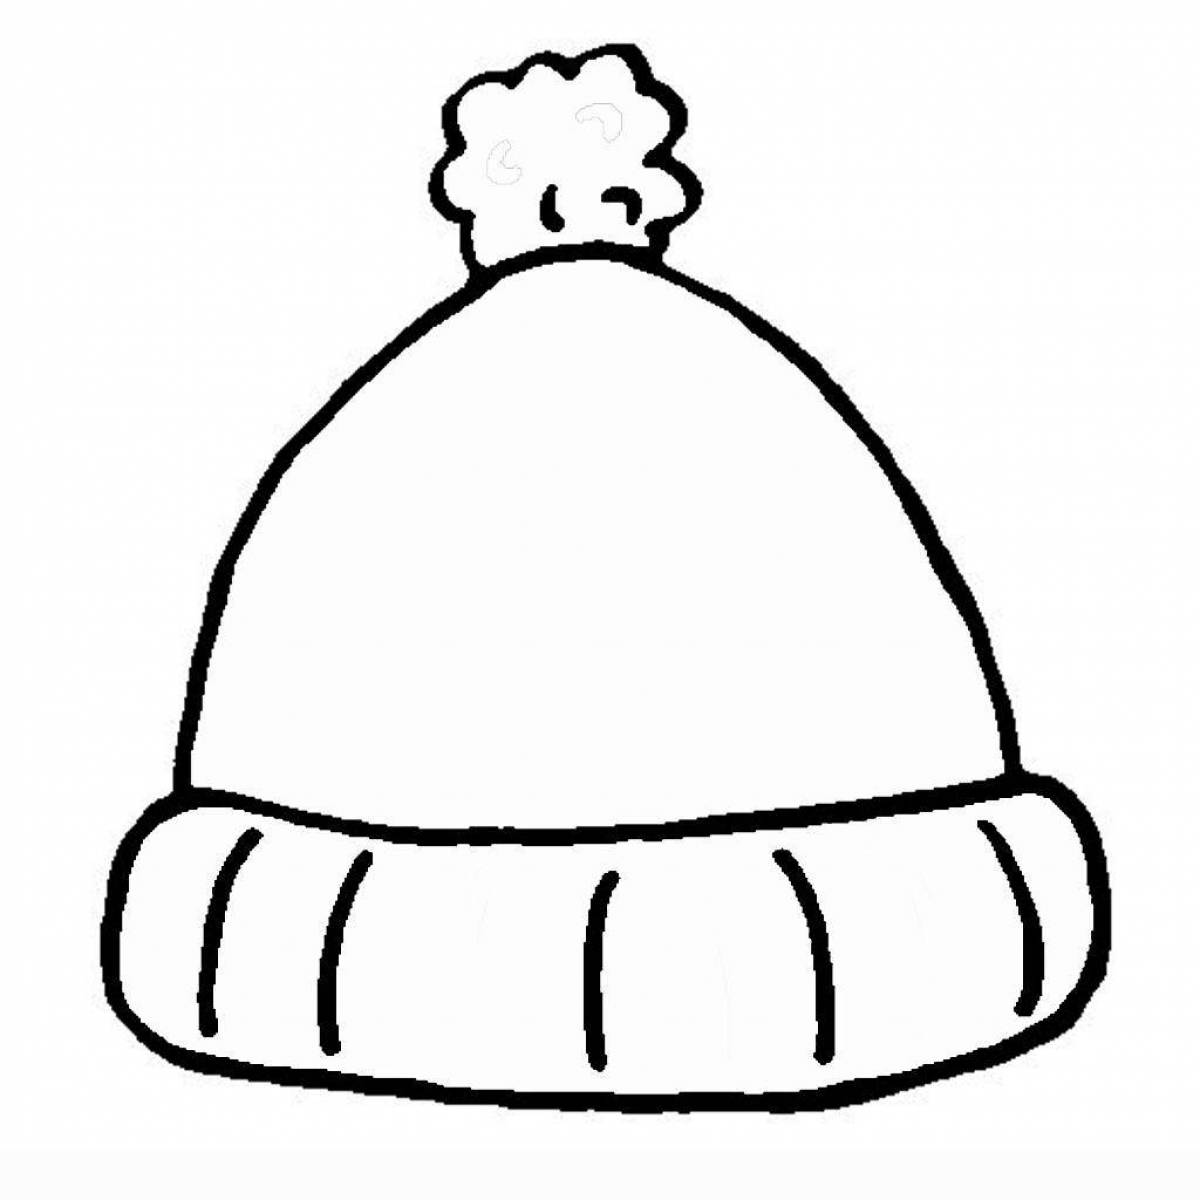 Christmas hat coloring page